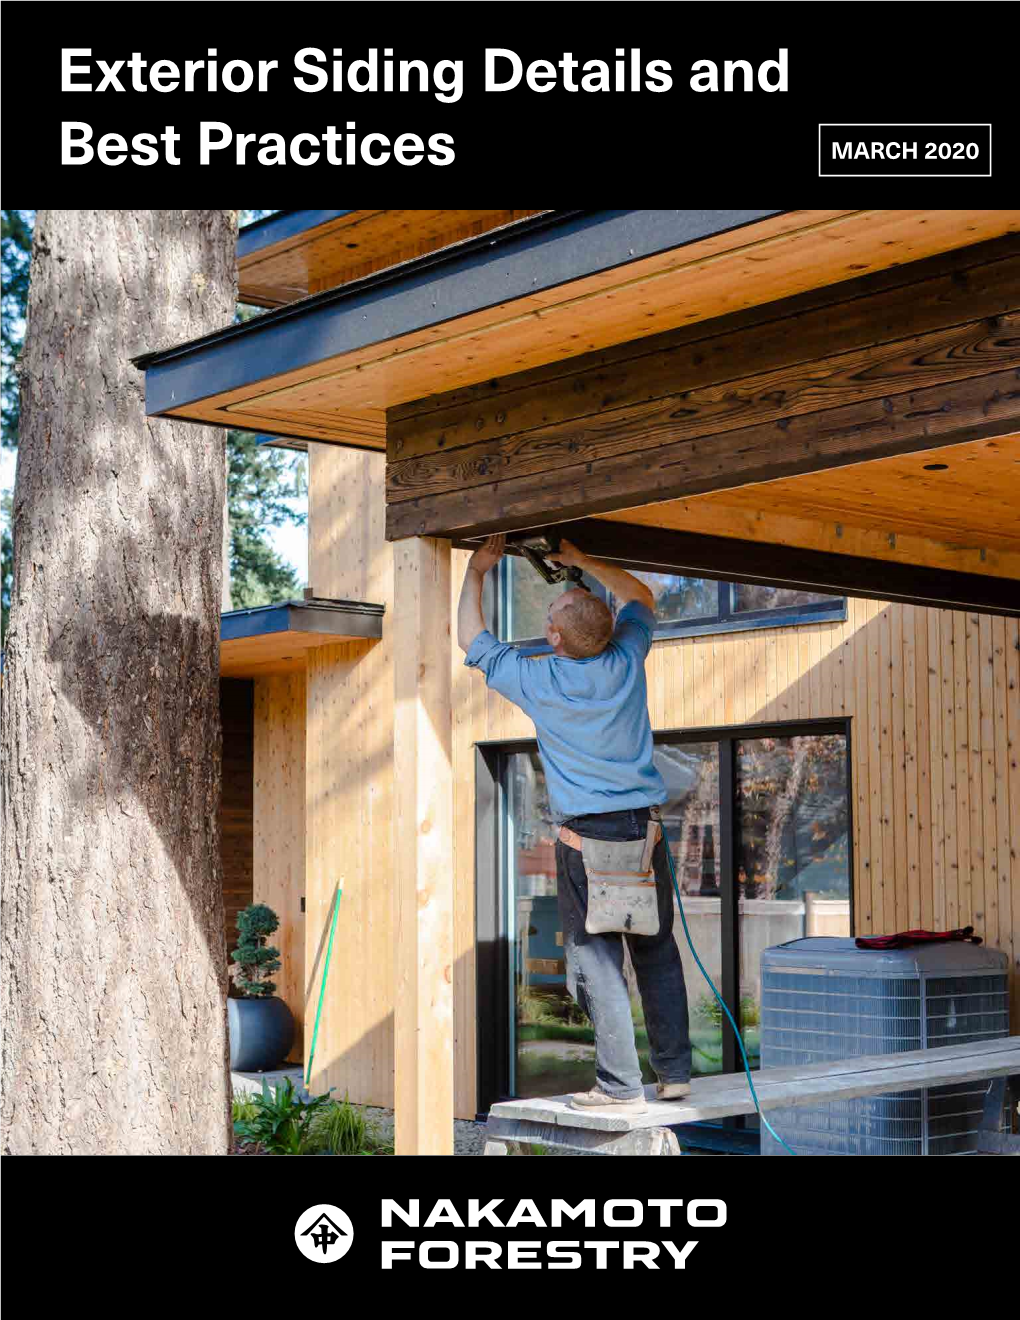 Exterior Siding Details and Best Practices MARCH 2020